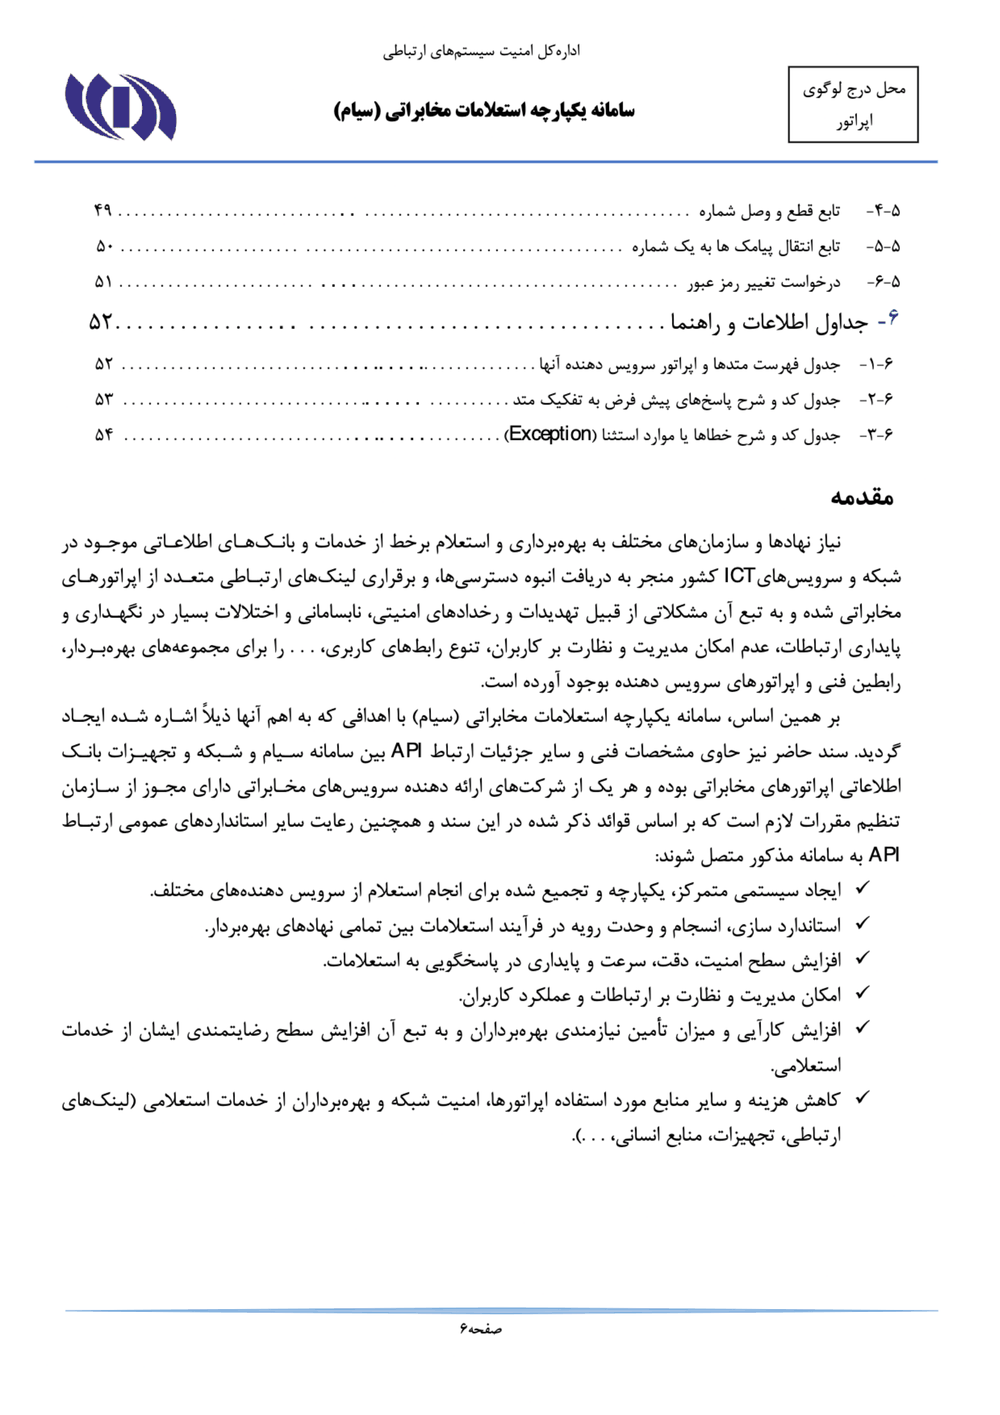 Page 6 from Iran’s SIAM Manual in Persian for Tracking and Controlling Mobile Phones